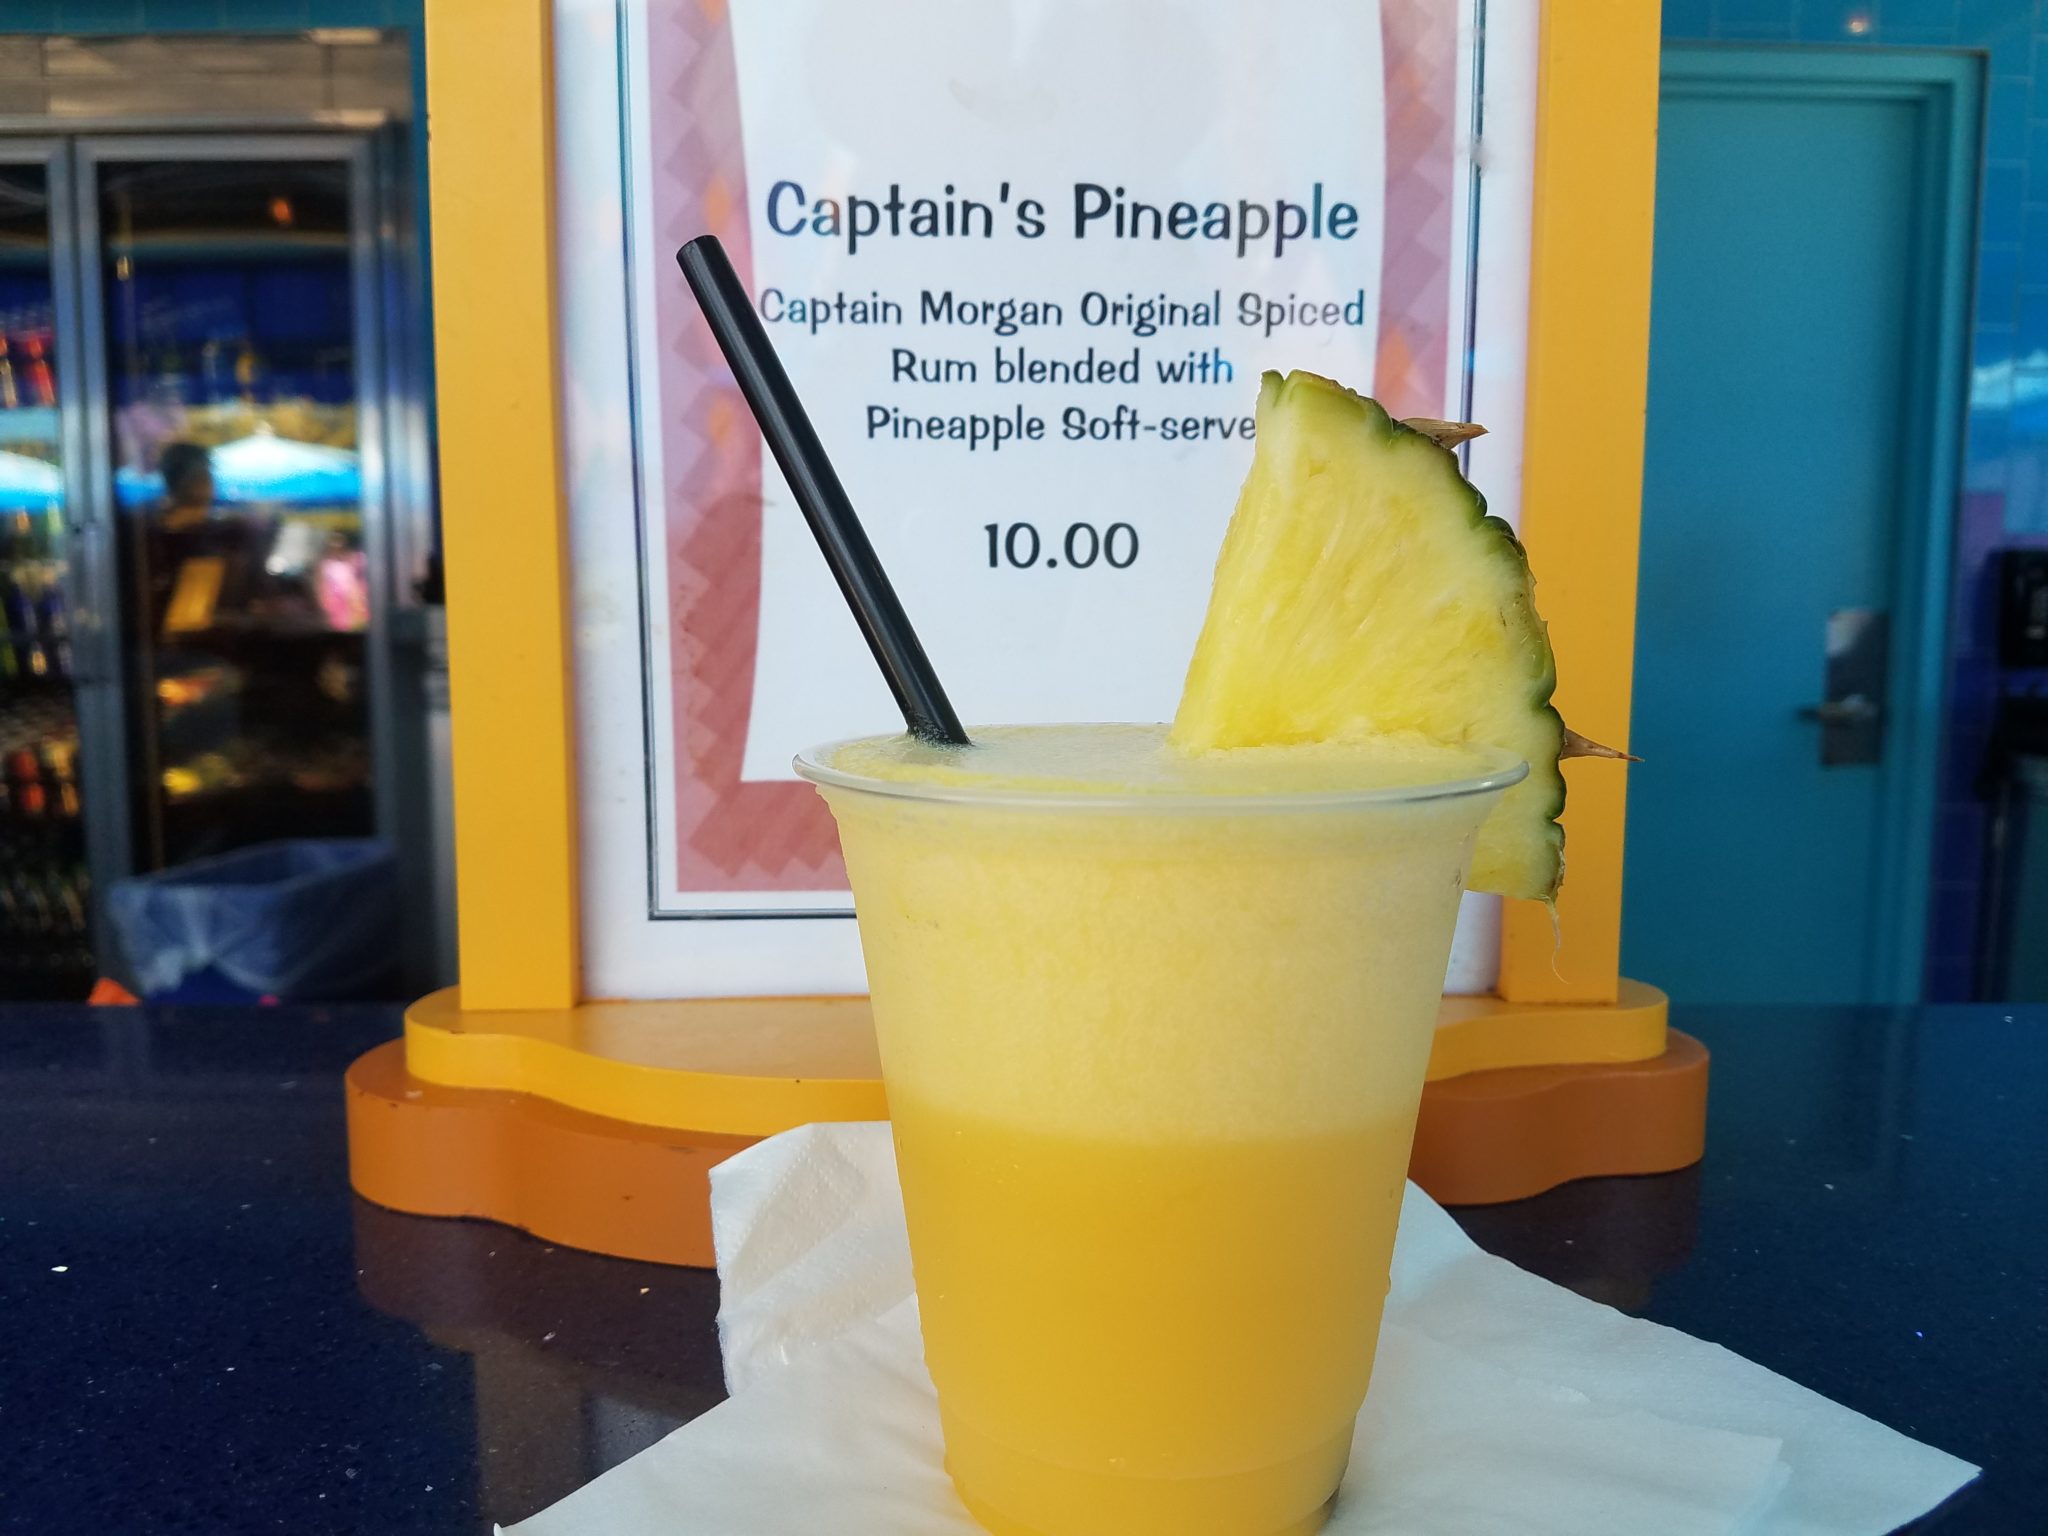 Add The Captain’s Pineapple To Your List of Must-try Adult Beverages For Your Disney Vacation